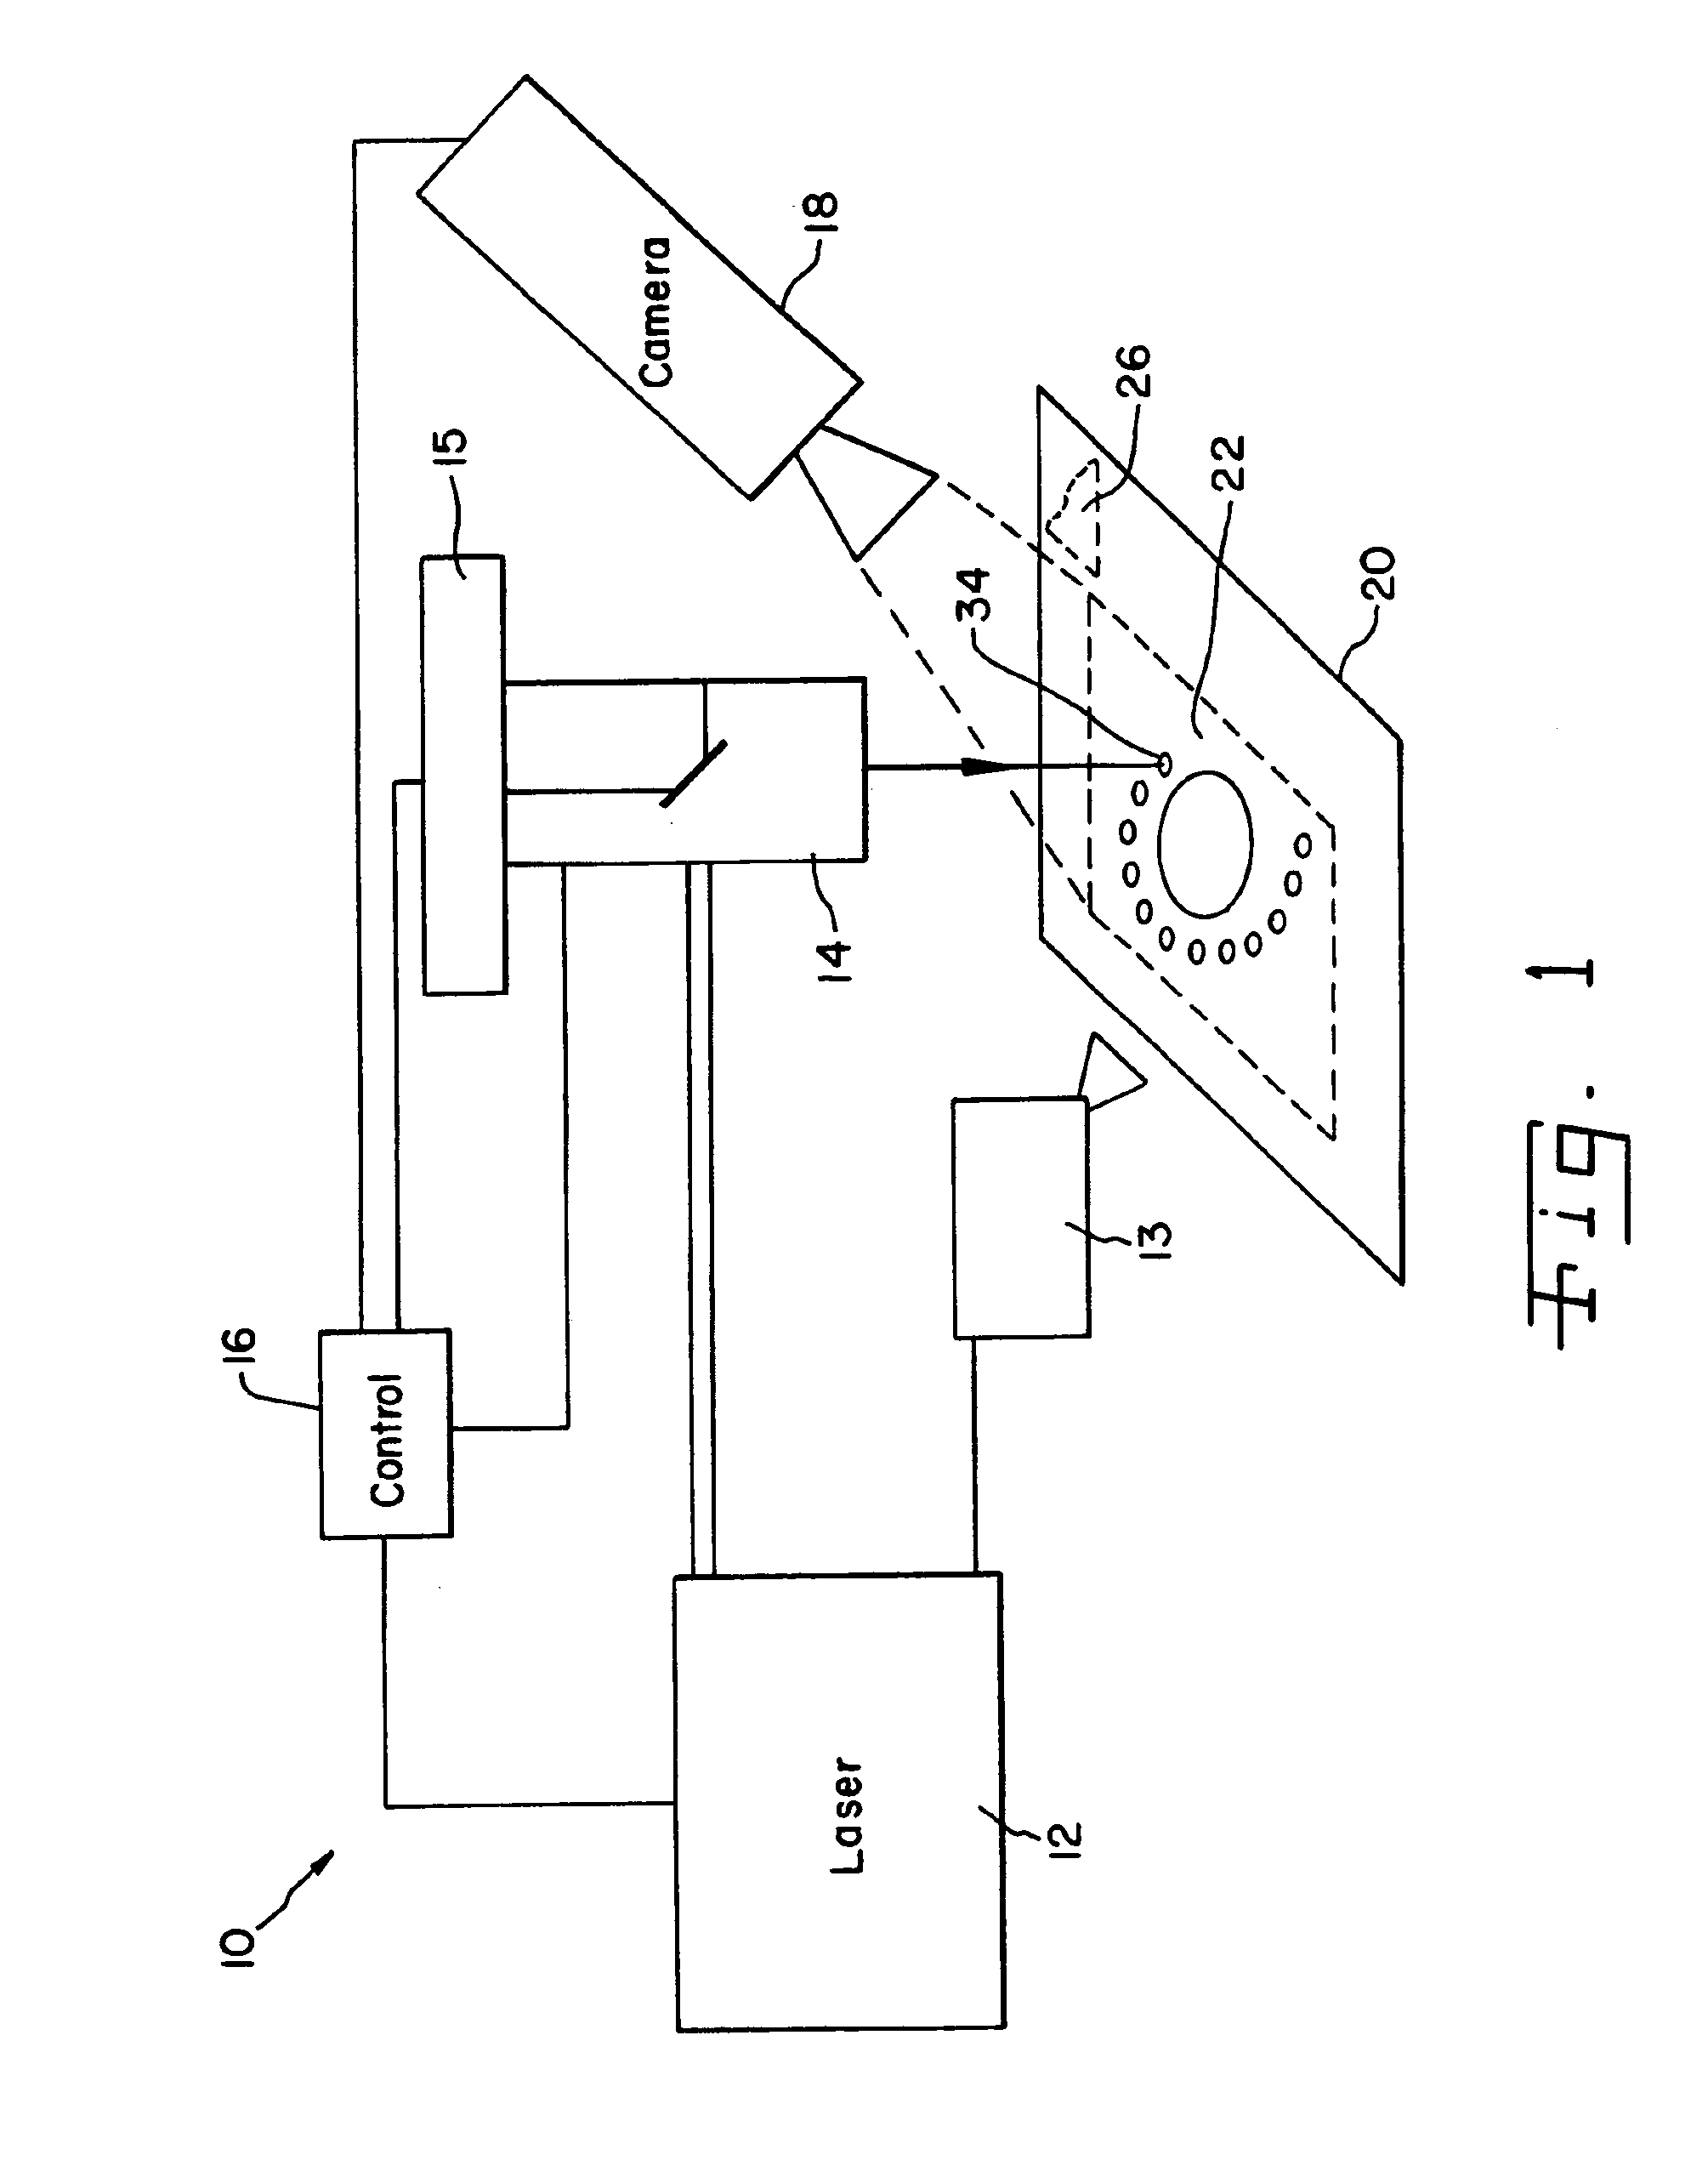 Automated positioning of mobile laser peening head